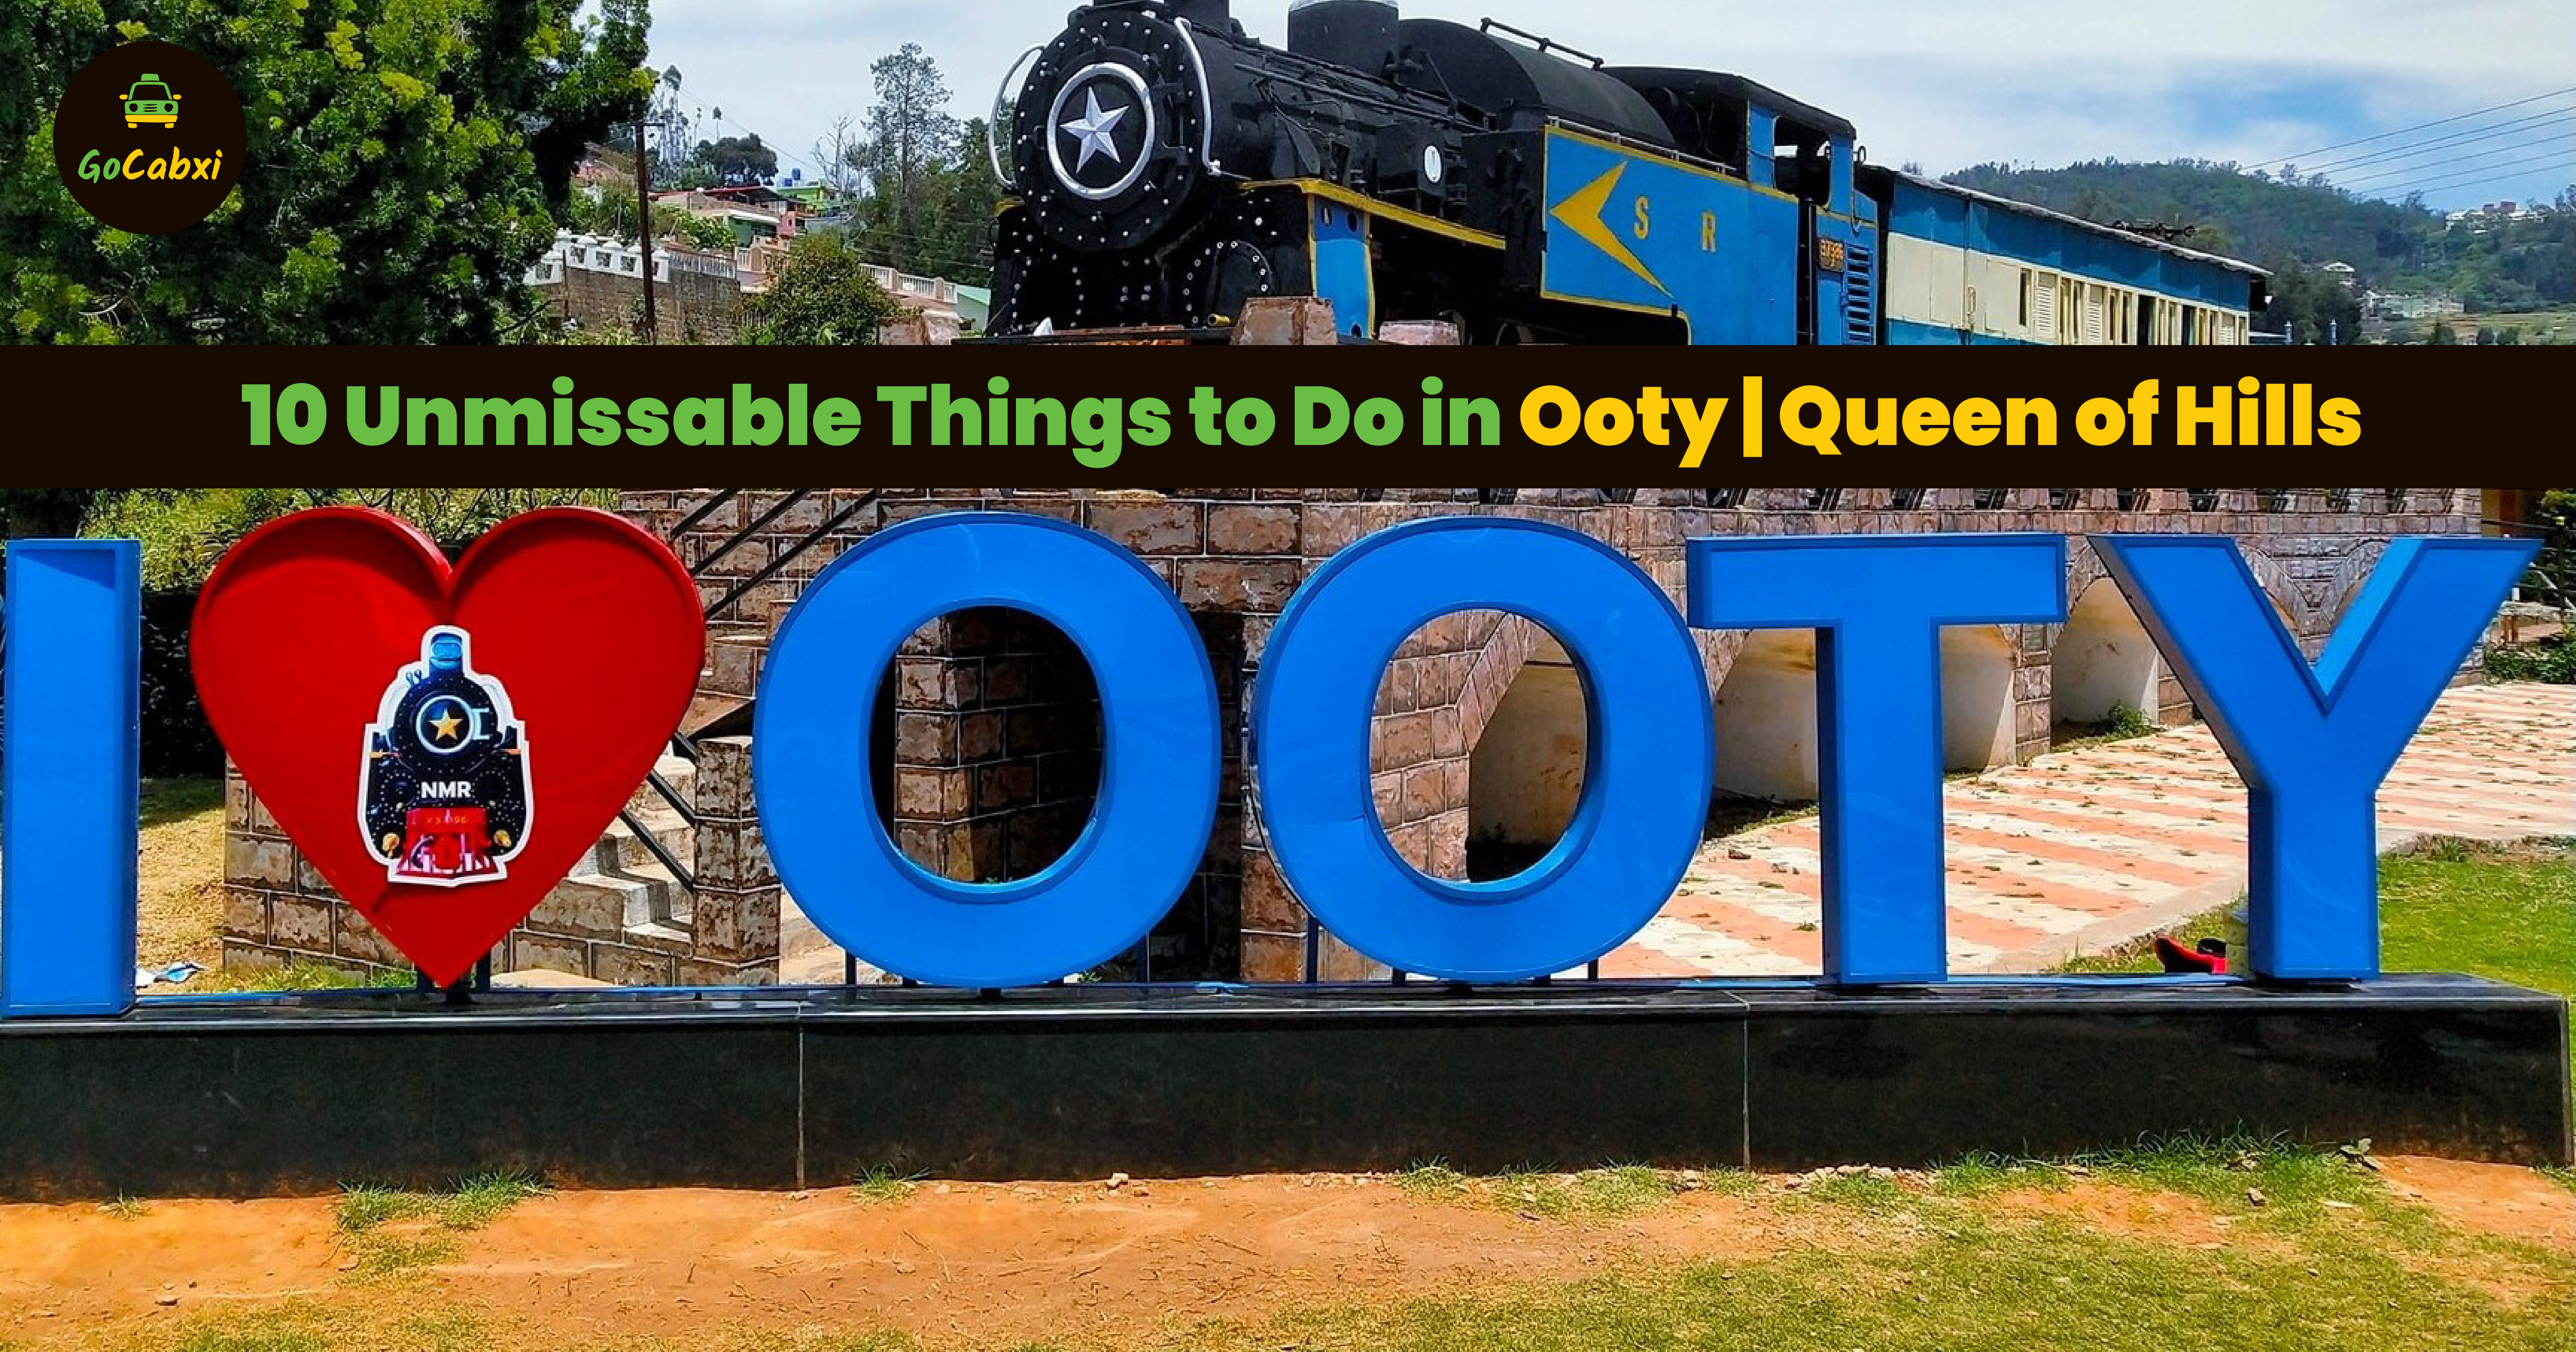 10 Unmissable Things to Do in Ooty